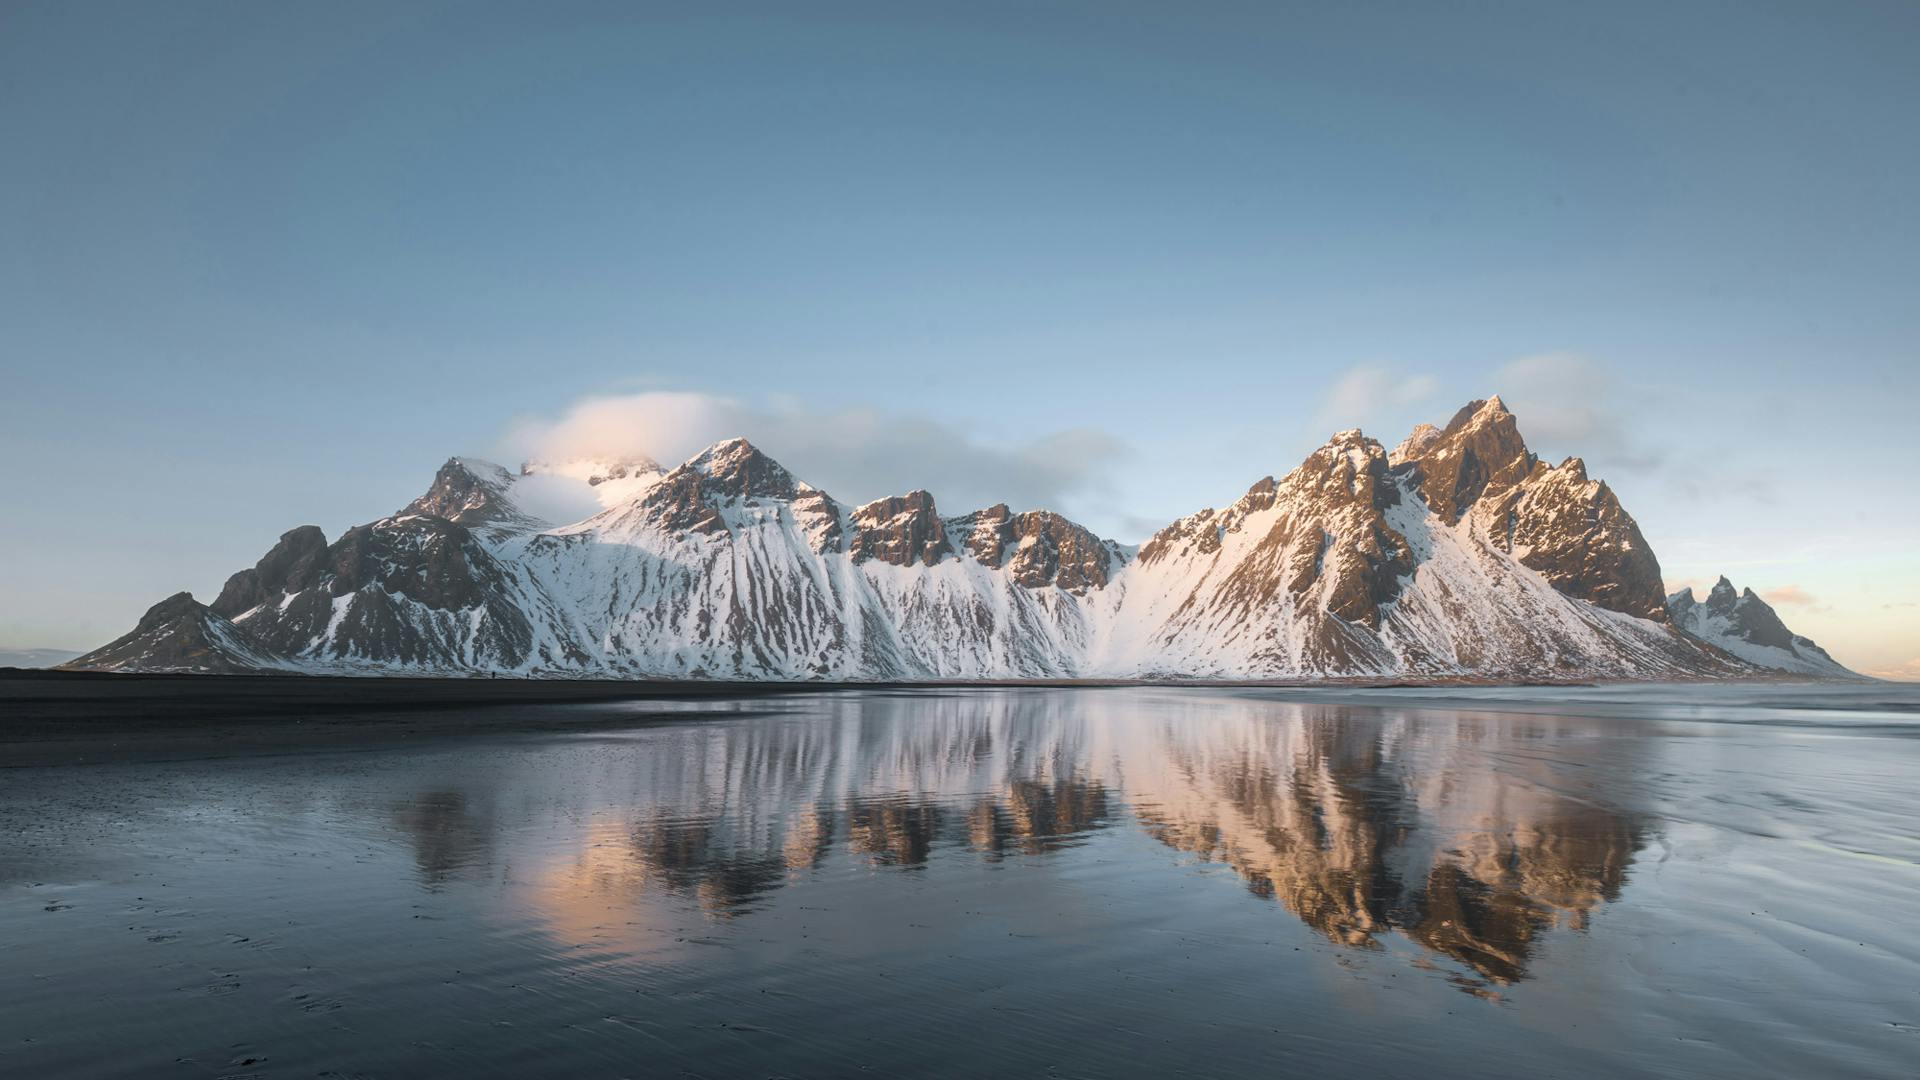 Vestrahorn mountain covered with snow while the shallow and calm beach is creating a gorgeous reflection in the water.